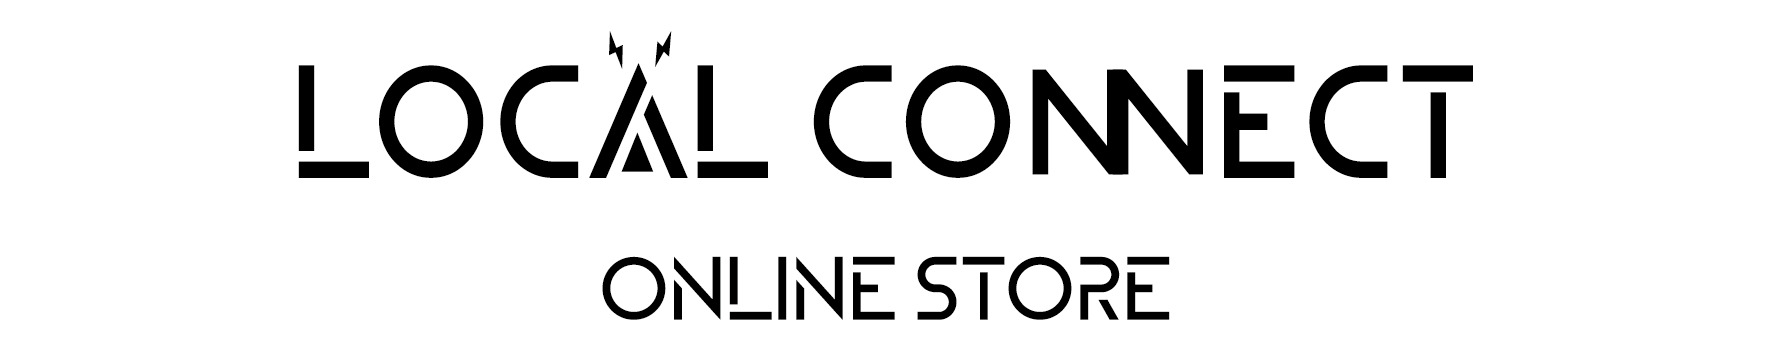 LOCAL CONNECT ONLINE STORE